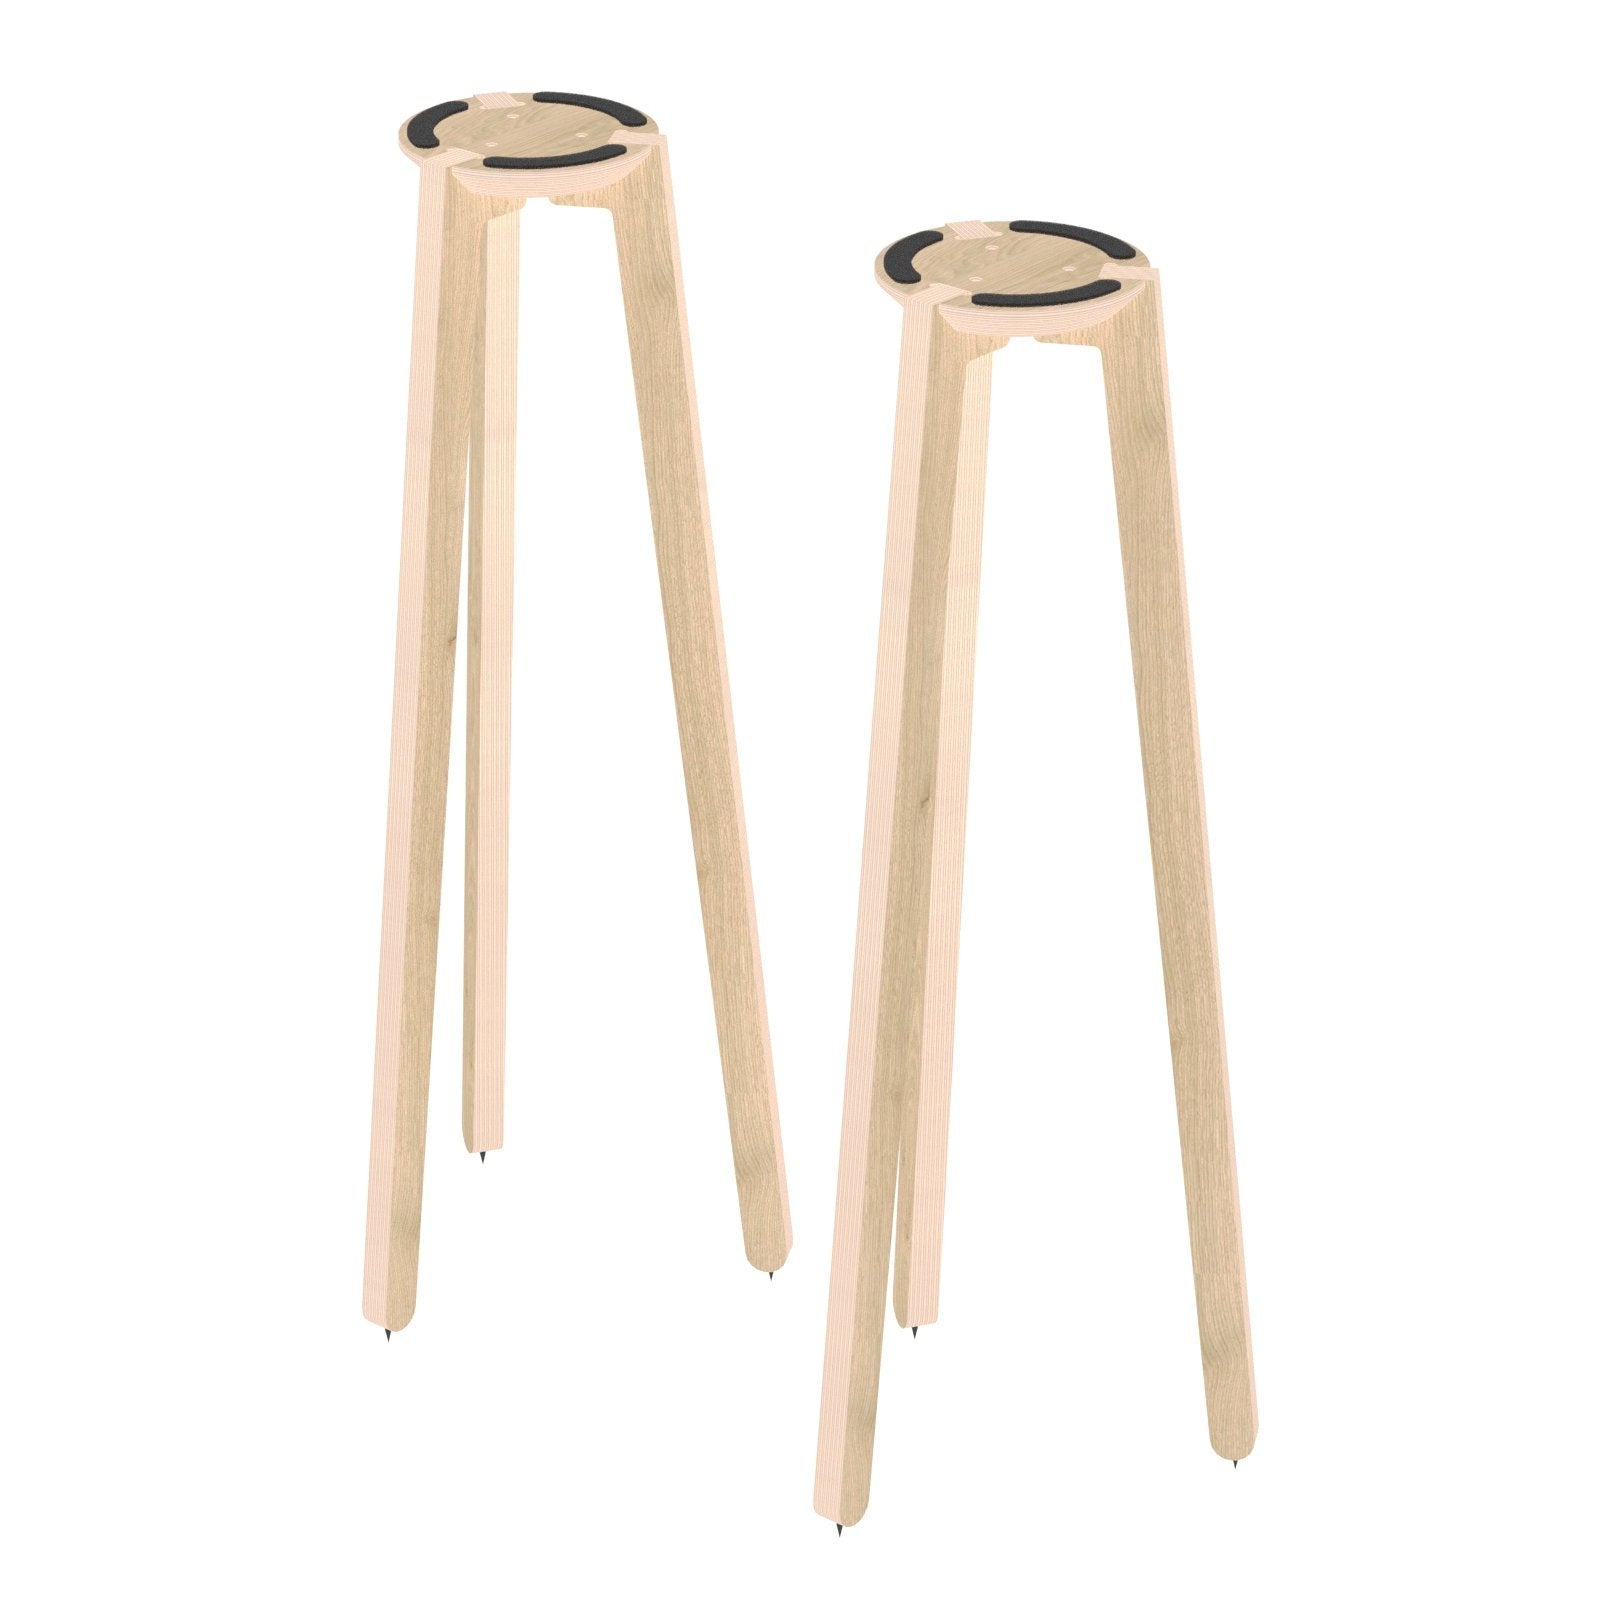 HABIB/CO - Tripod Speaker Stand Pair (natural) - 36" height - 7.5" base - Carpet Spikes : None